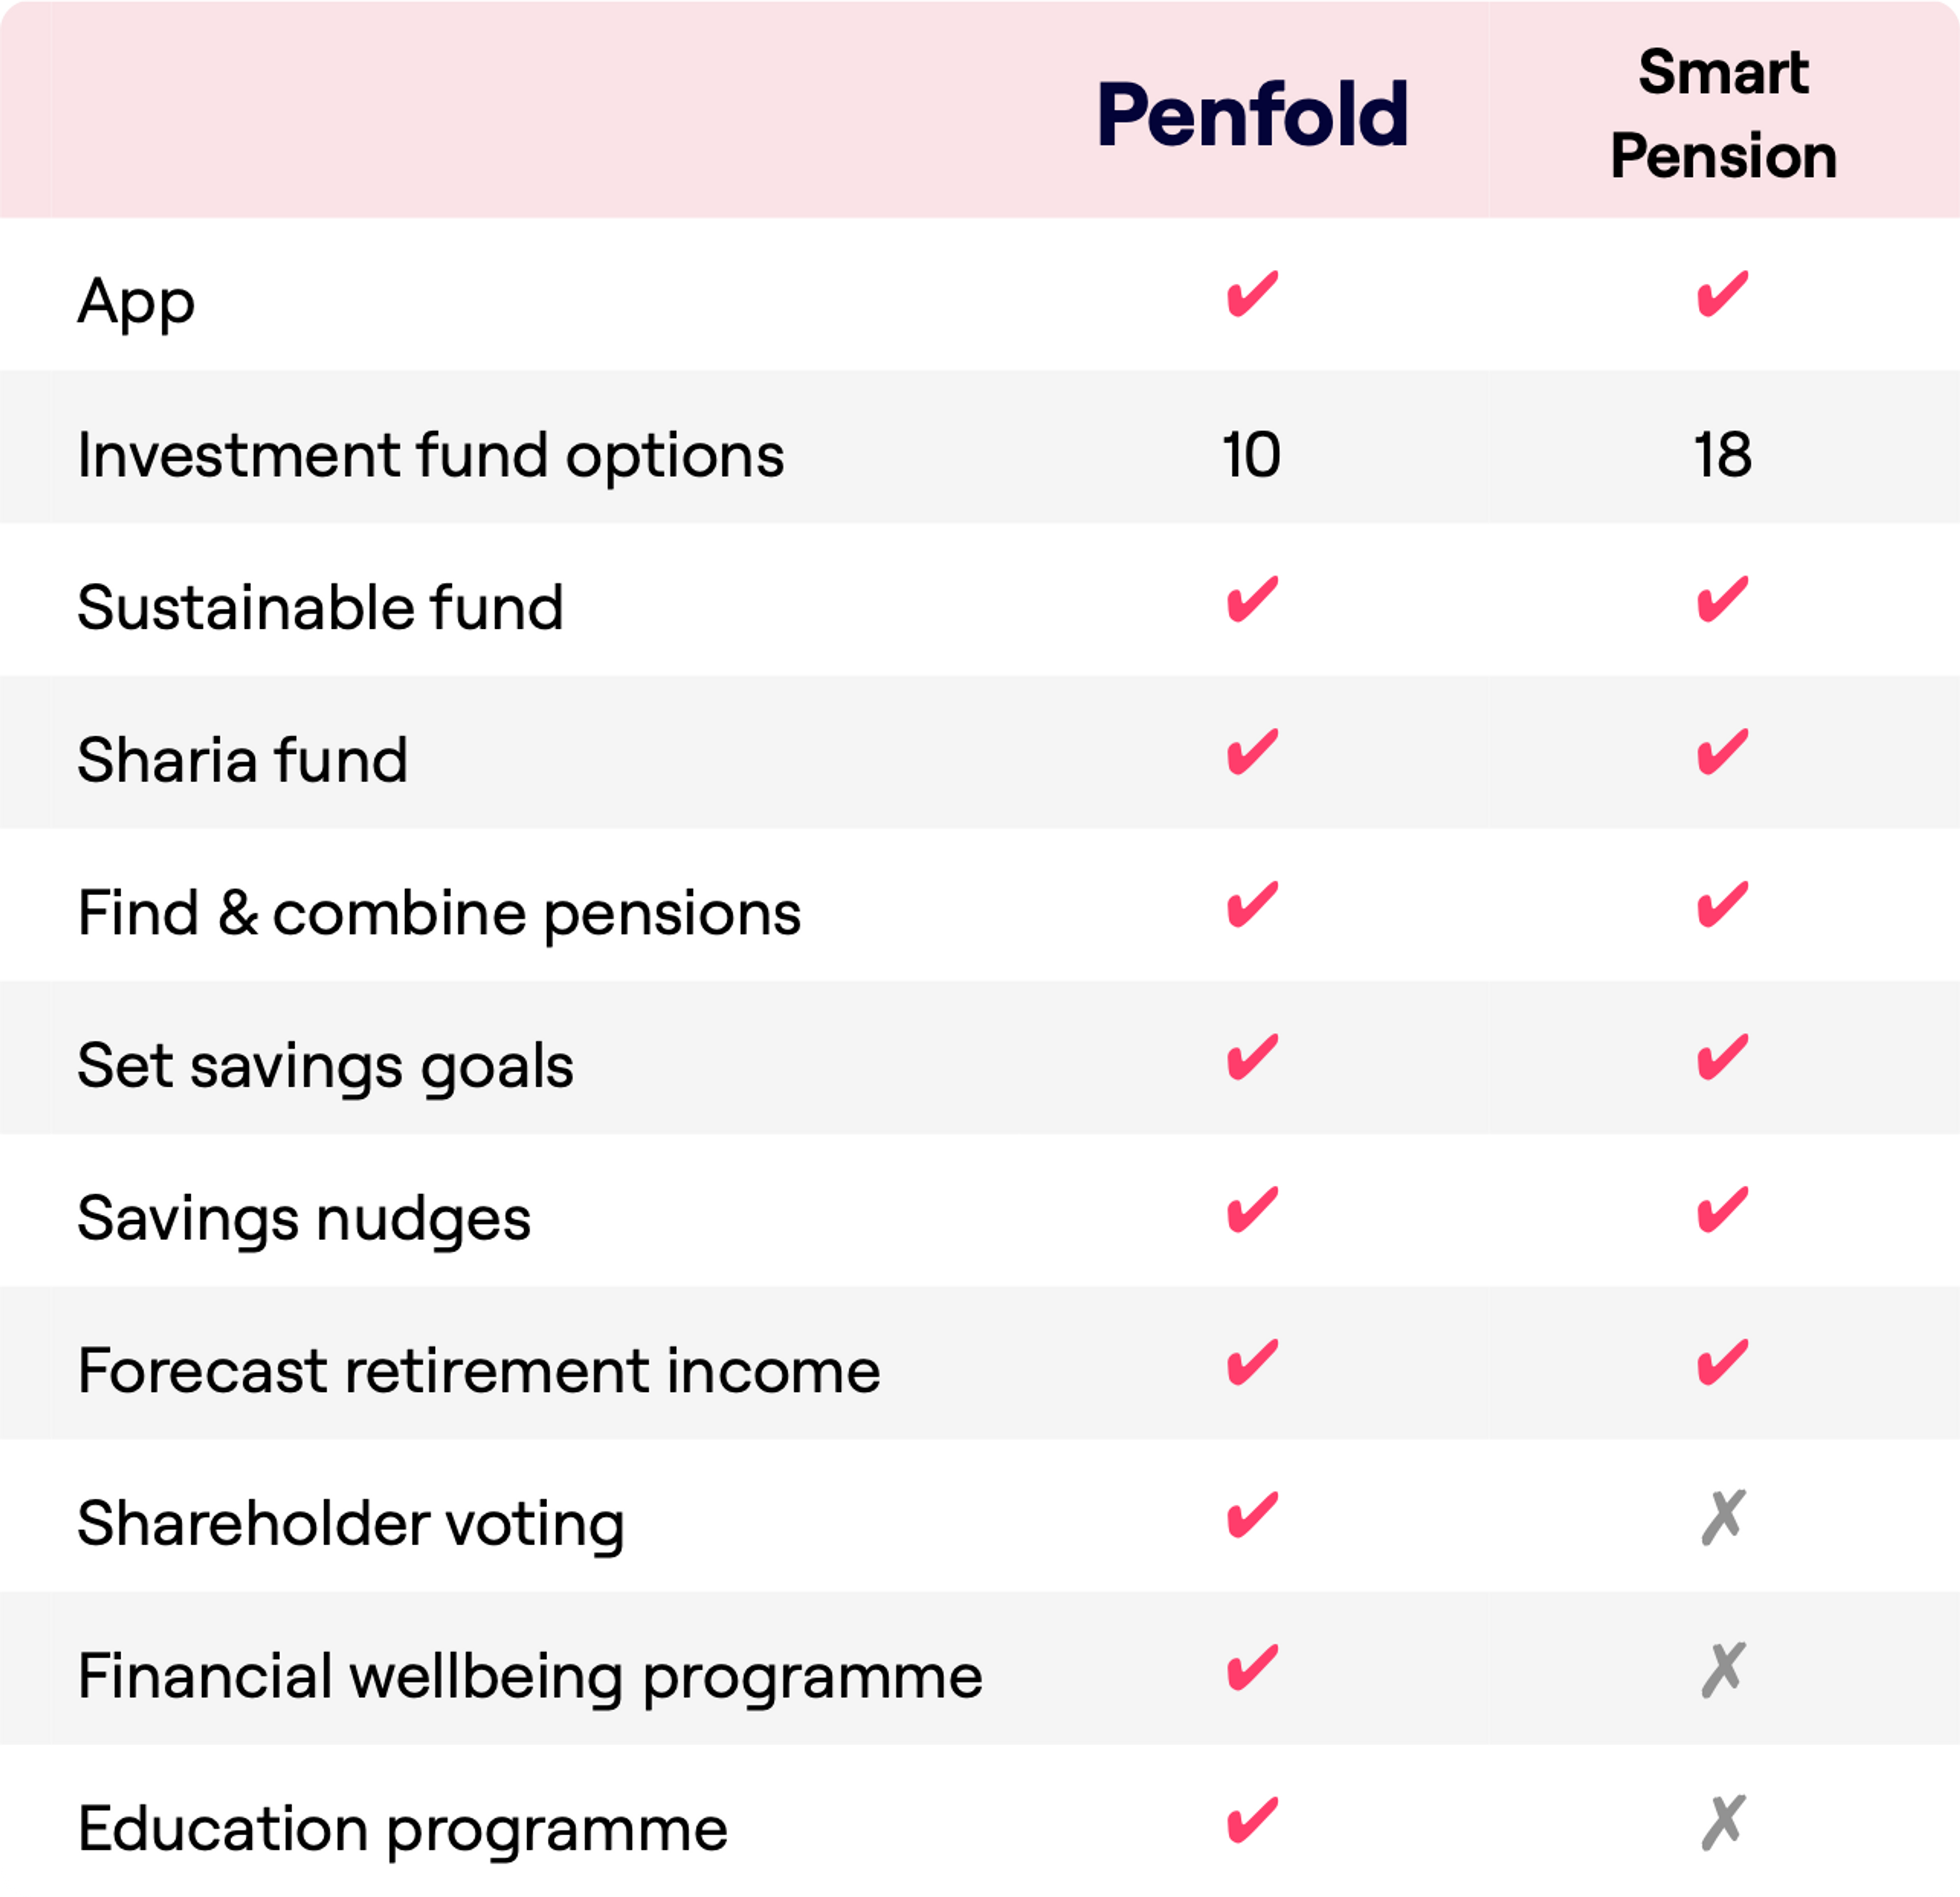 A feature comparison chart for the Penfold and Smart Pension apps. Both offer app accessibility, sustainable and Sharia funds, the ability to find and combine pensions, set savings goals, and savings nudges. Penfold provides 10 investment fund options, while Smart Pension offers 18. Both can forecast retirement income, but only Penfold offers shareholder voting, a financial wellbeing programme, and an education programme. Smart Pension does not offer these three features.